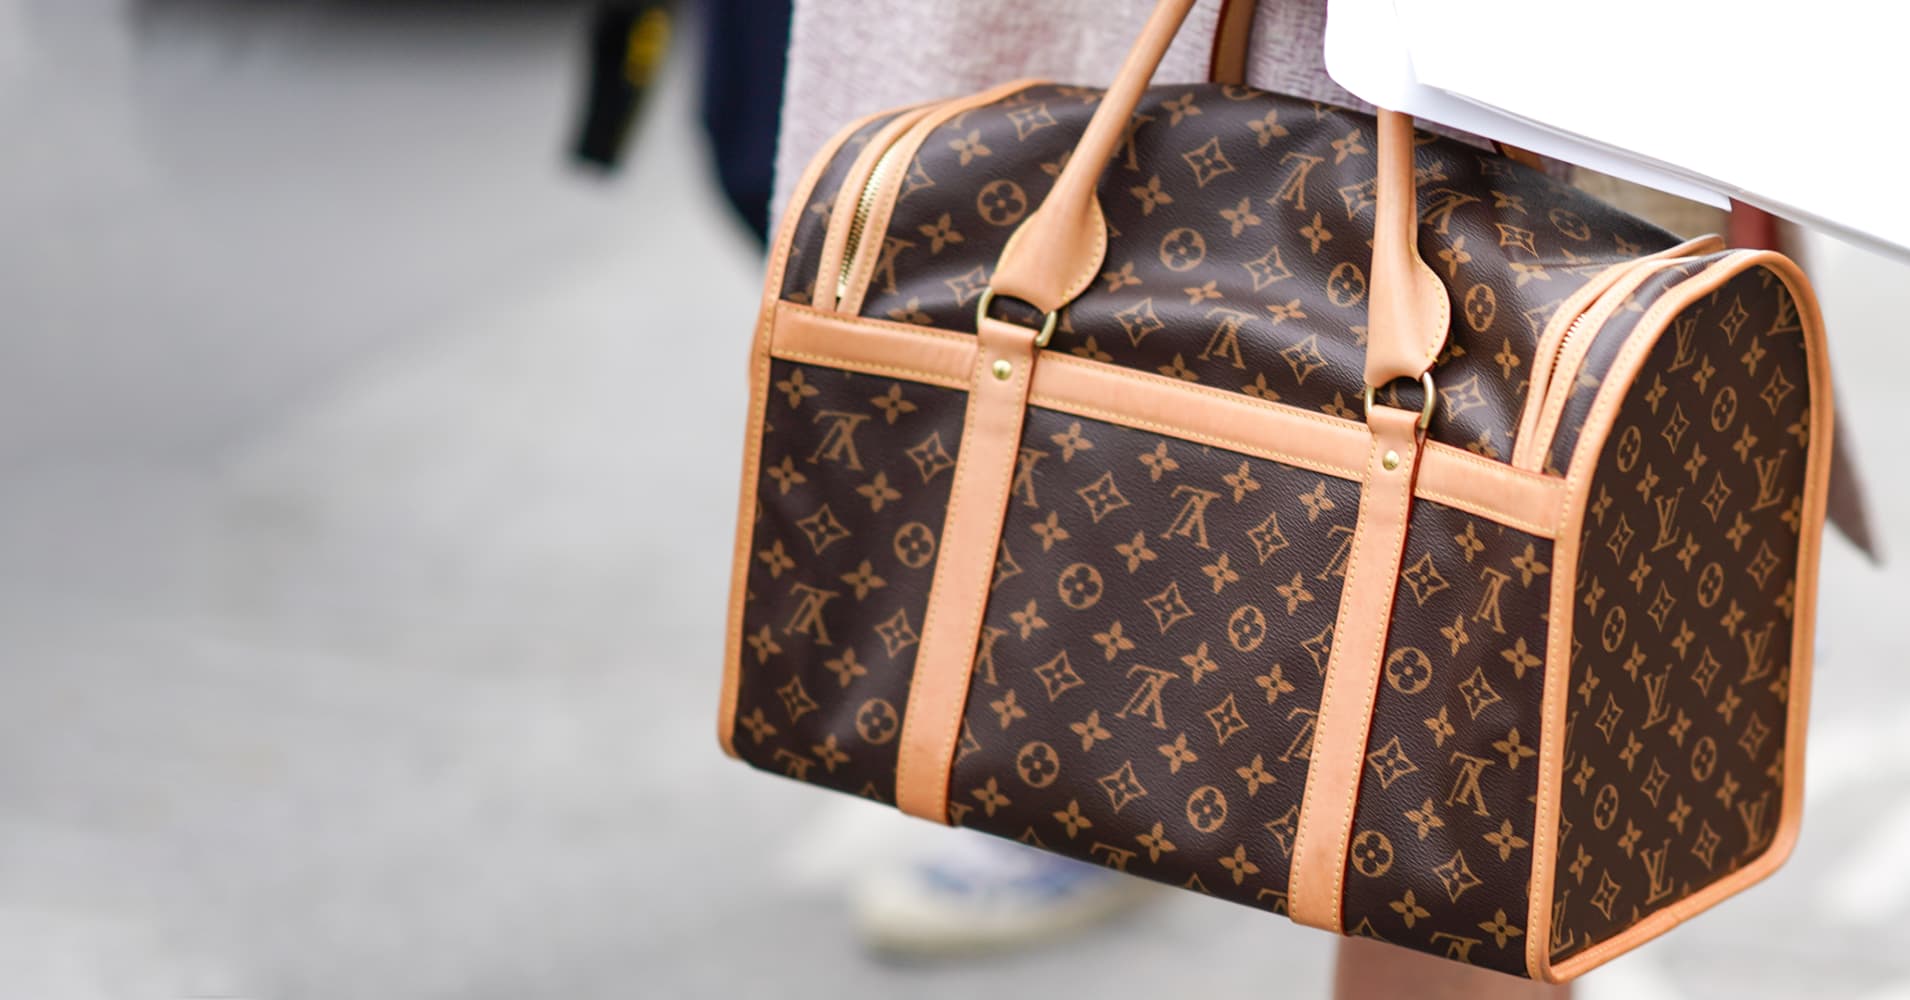 Top 10 Most Expensive Louis Vuitton Items - Expensive World